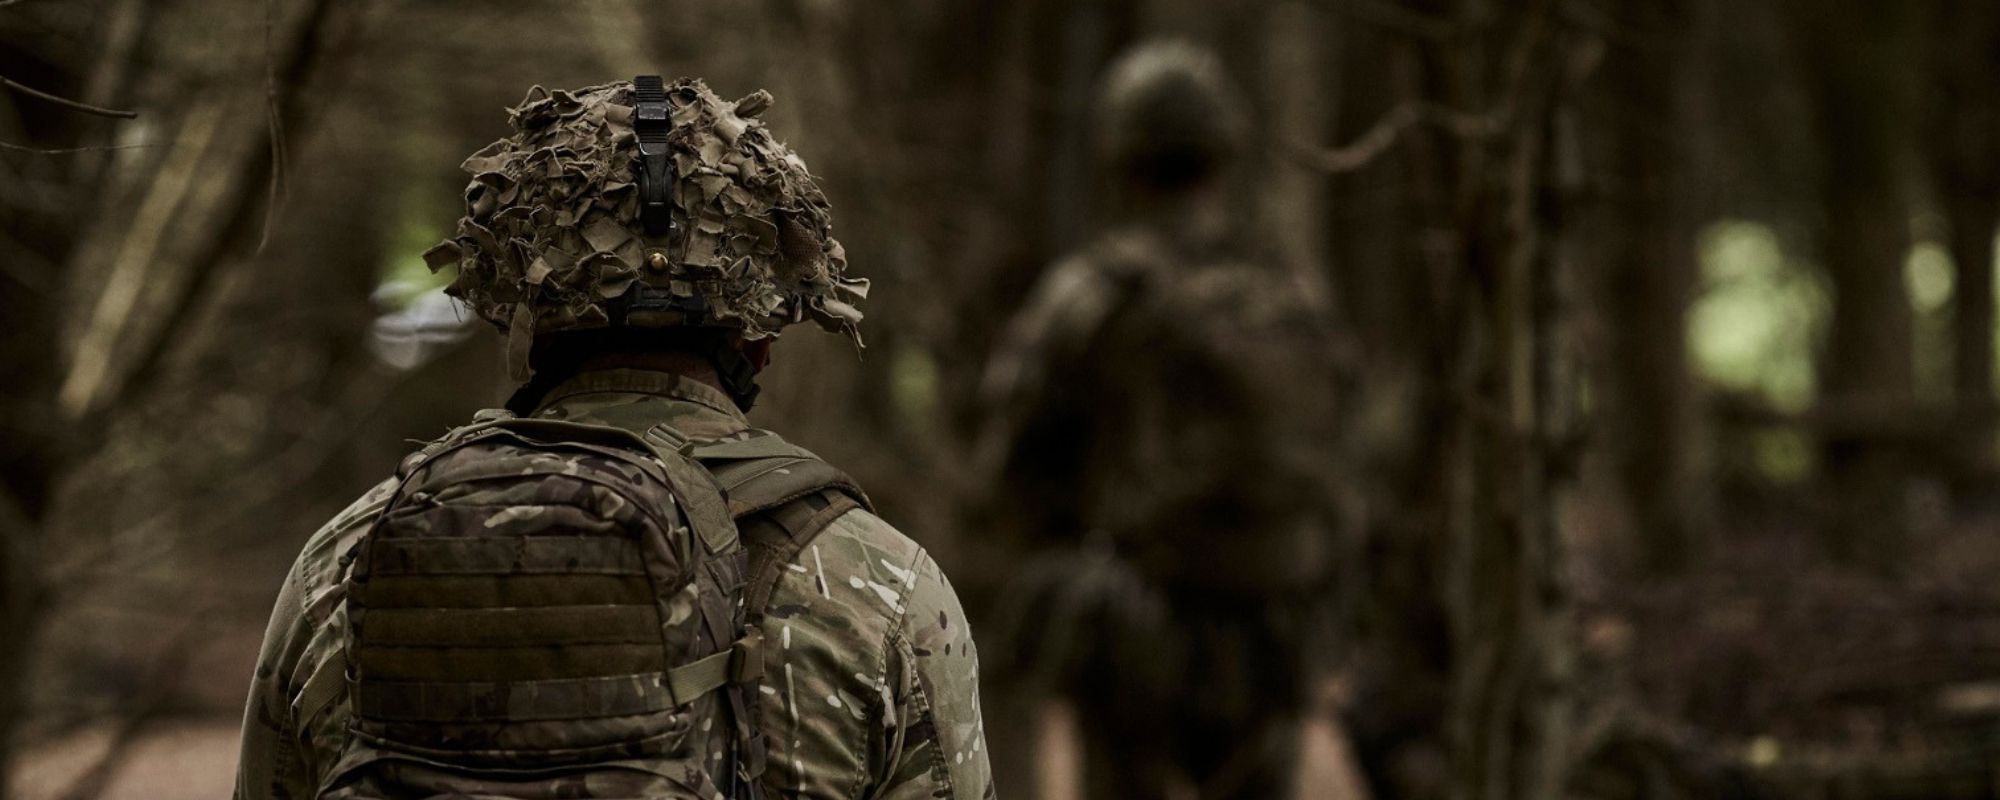 Army Kit insurance protects you and your possession for loss or theft.